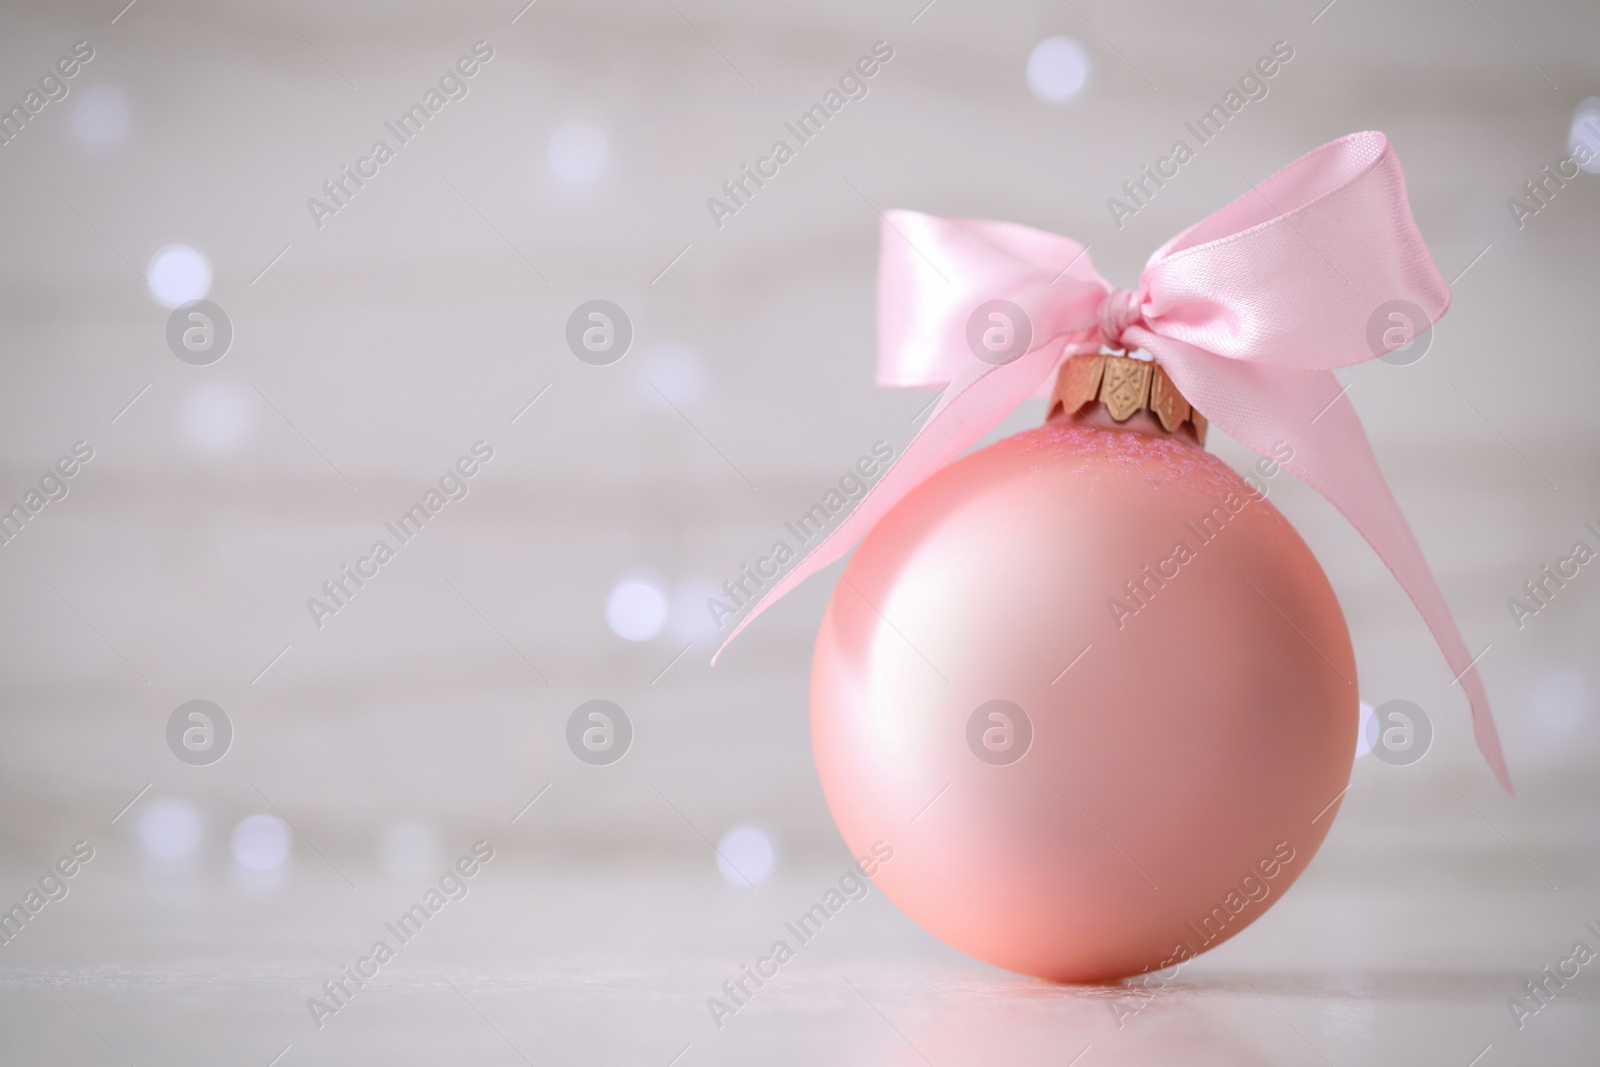 Photo of Beautiful Christmas ball on table against blurred festive lights. Space for text